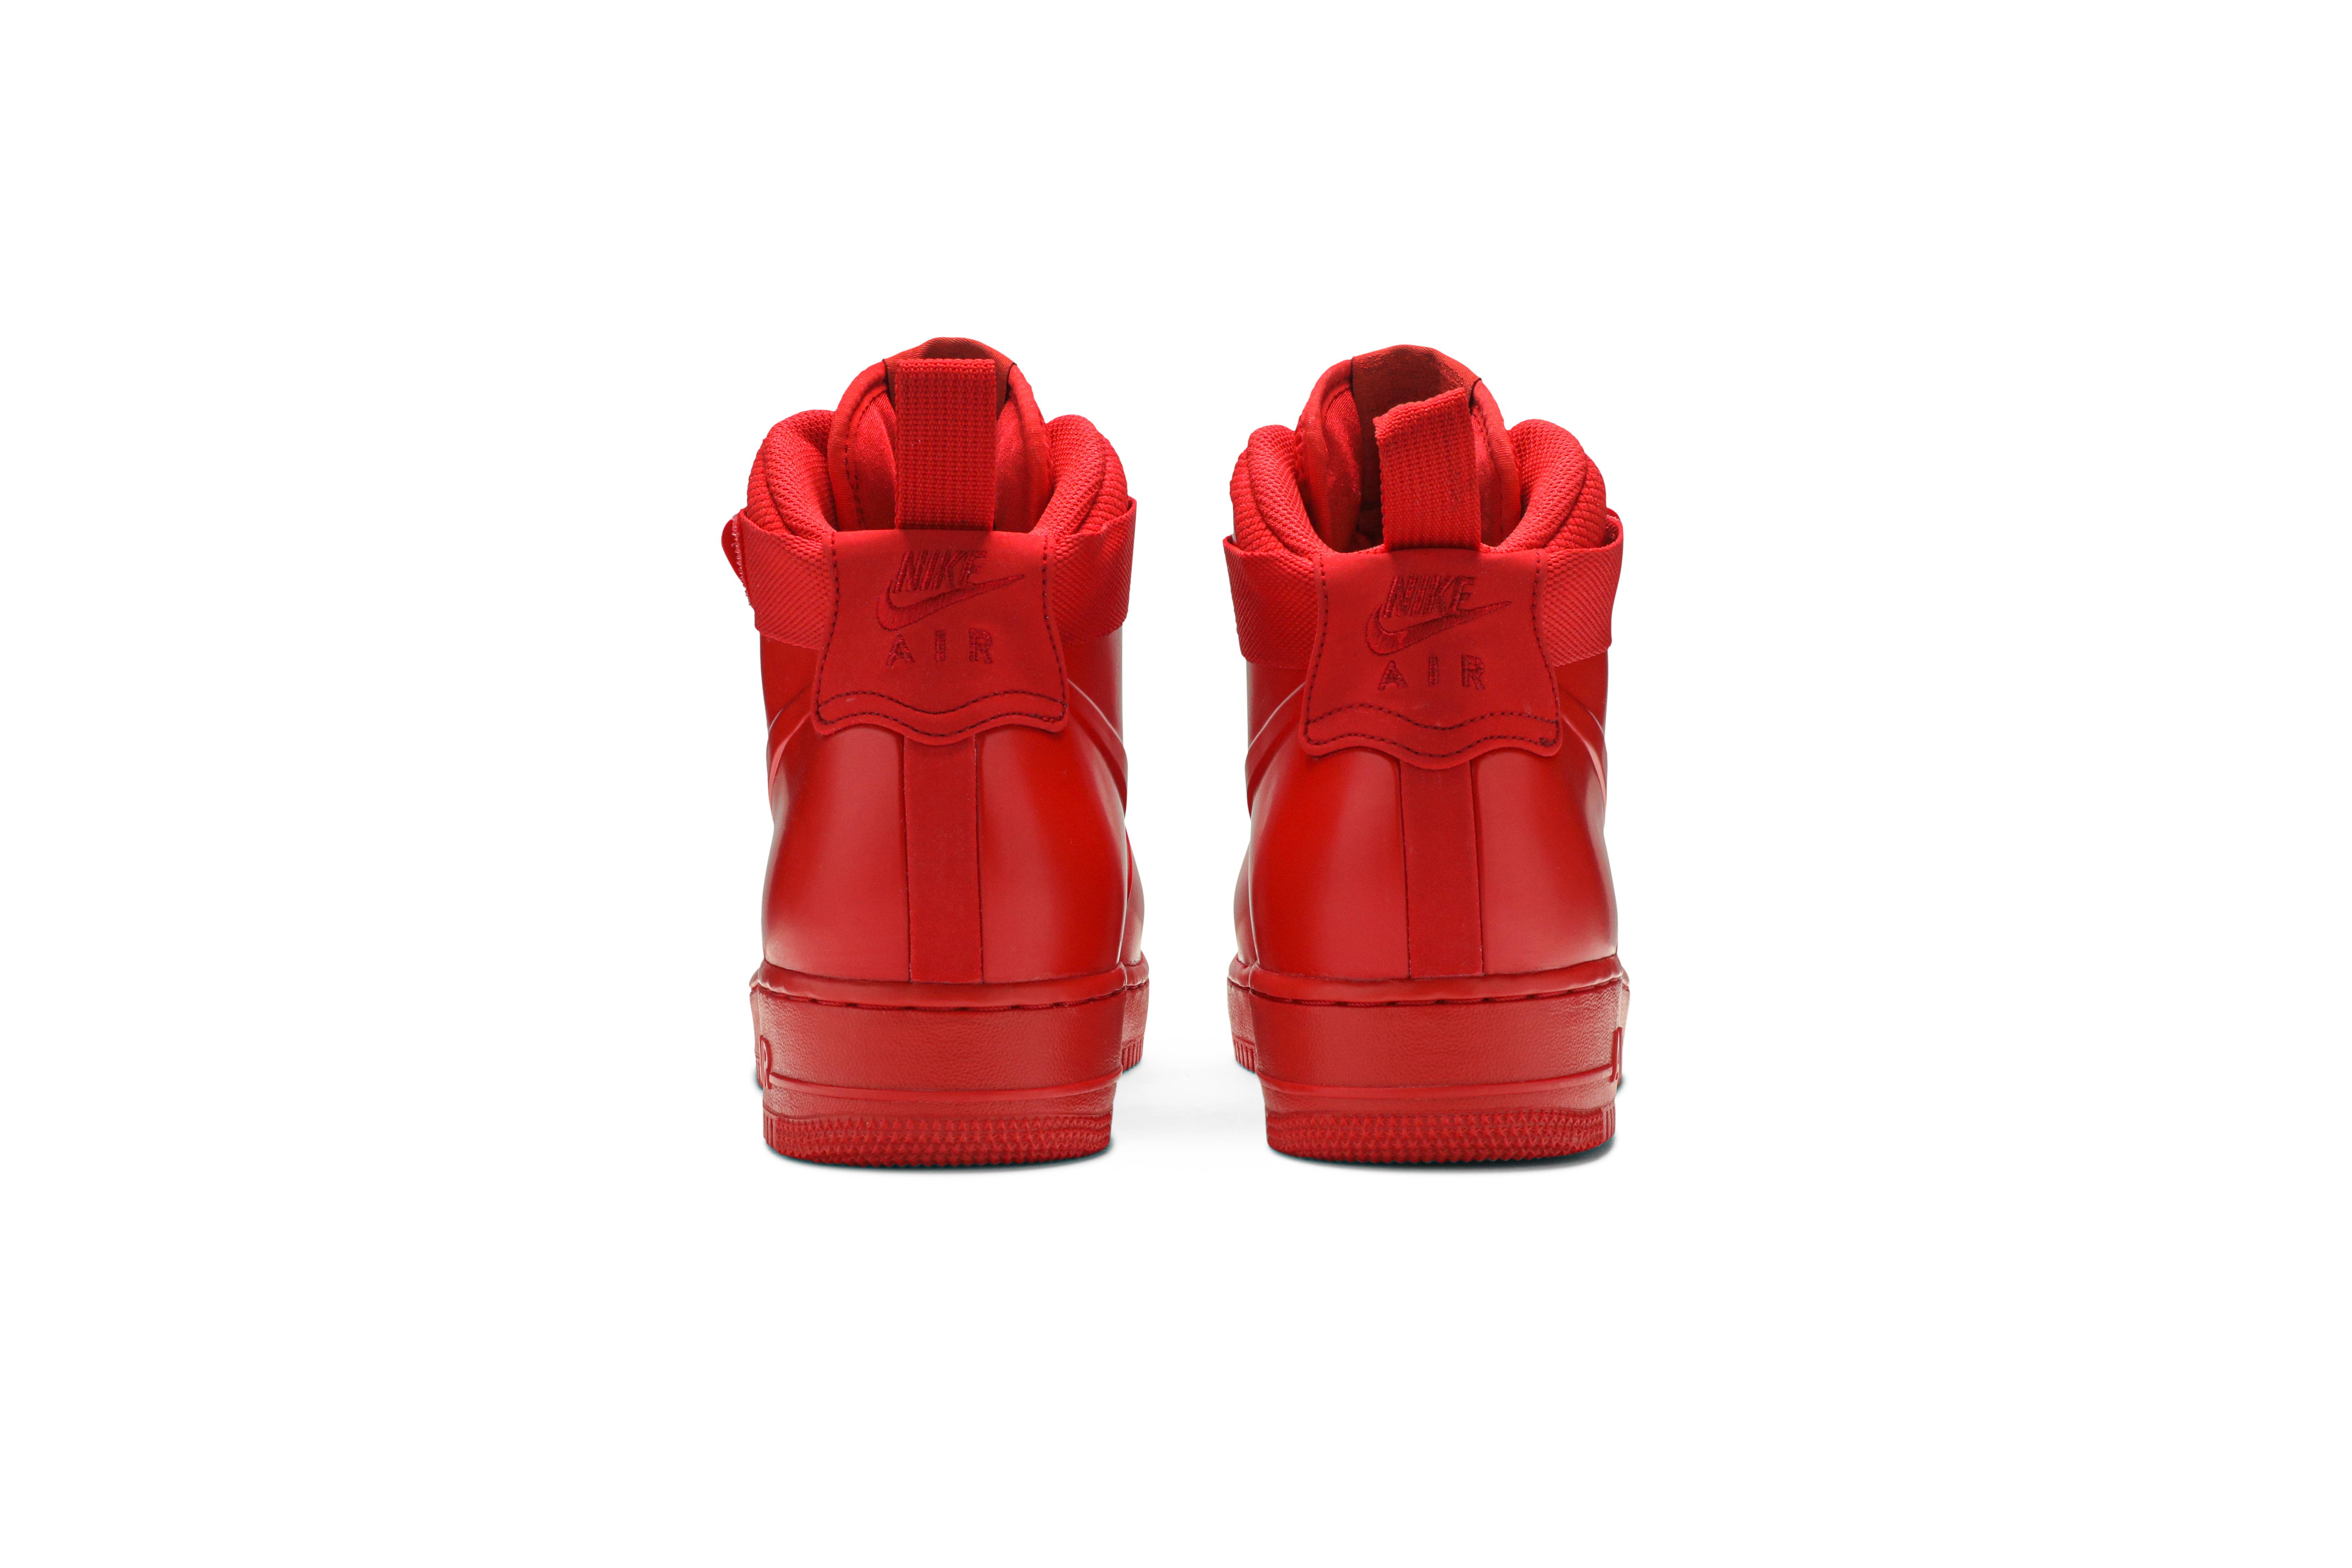 air force 1 foamposite cup university red